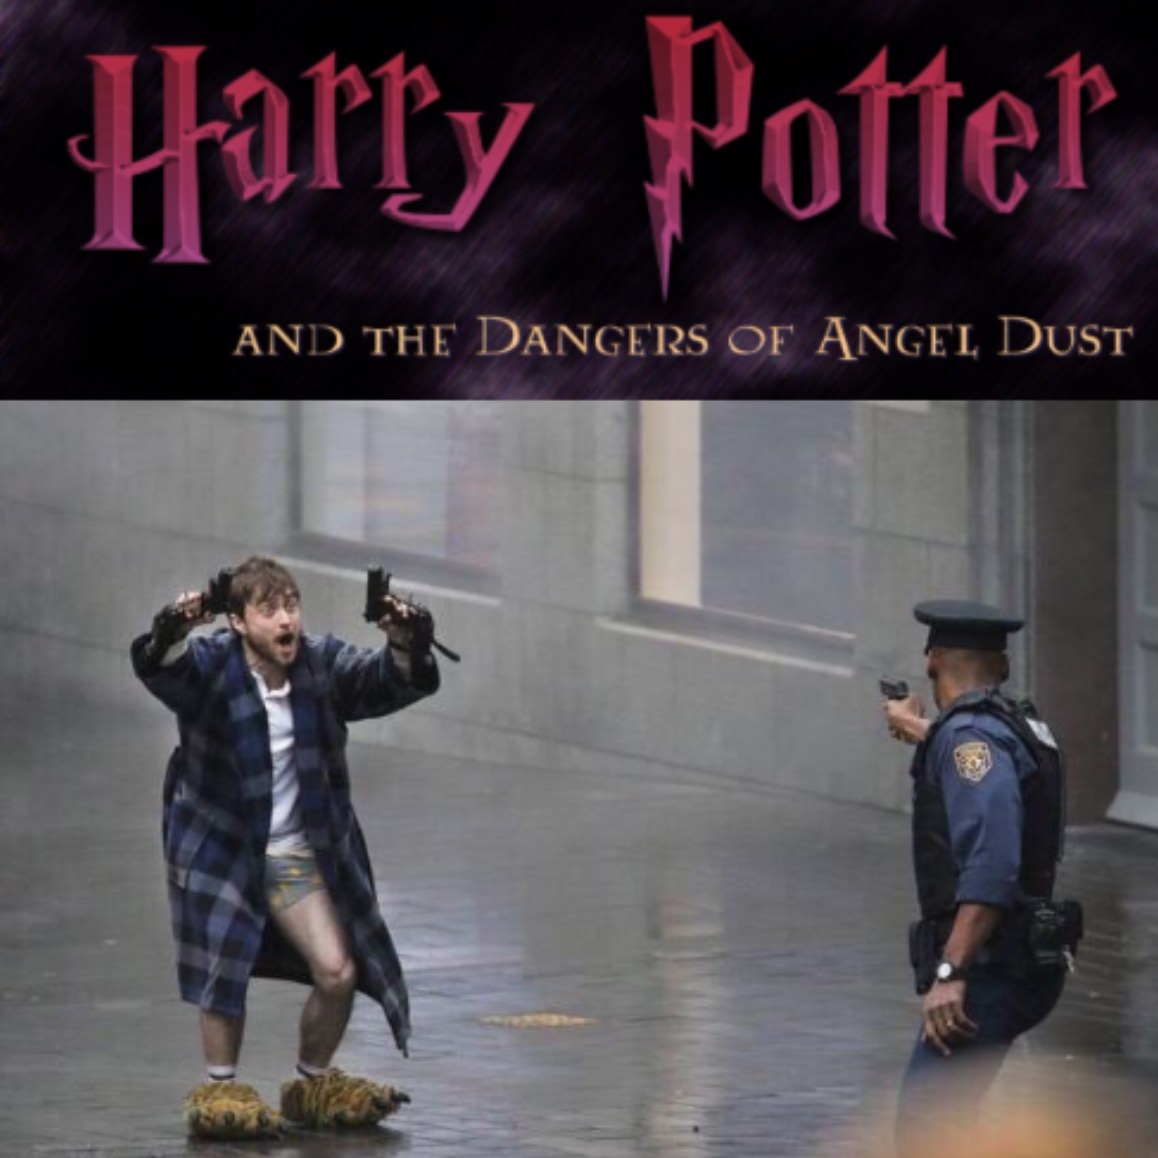 new harry potter looks great - Harry Potter And The Dangers Of Angel Dust